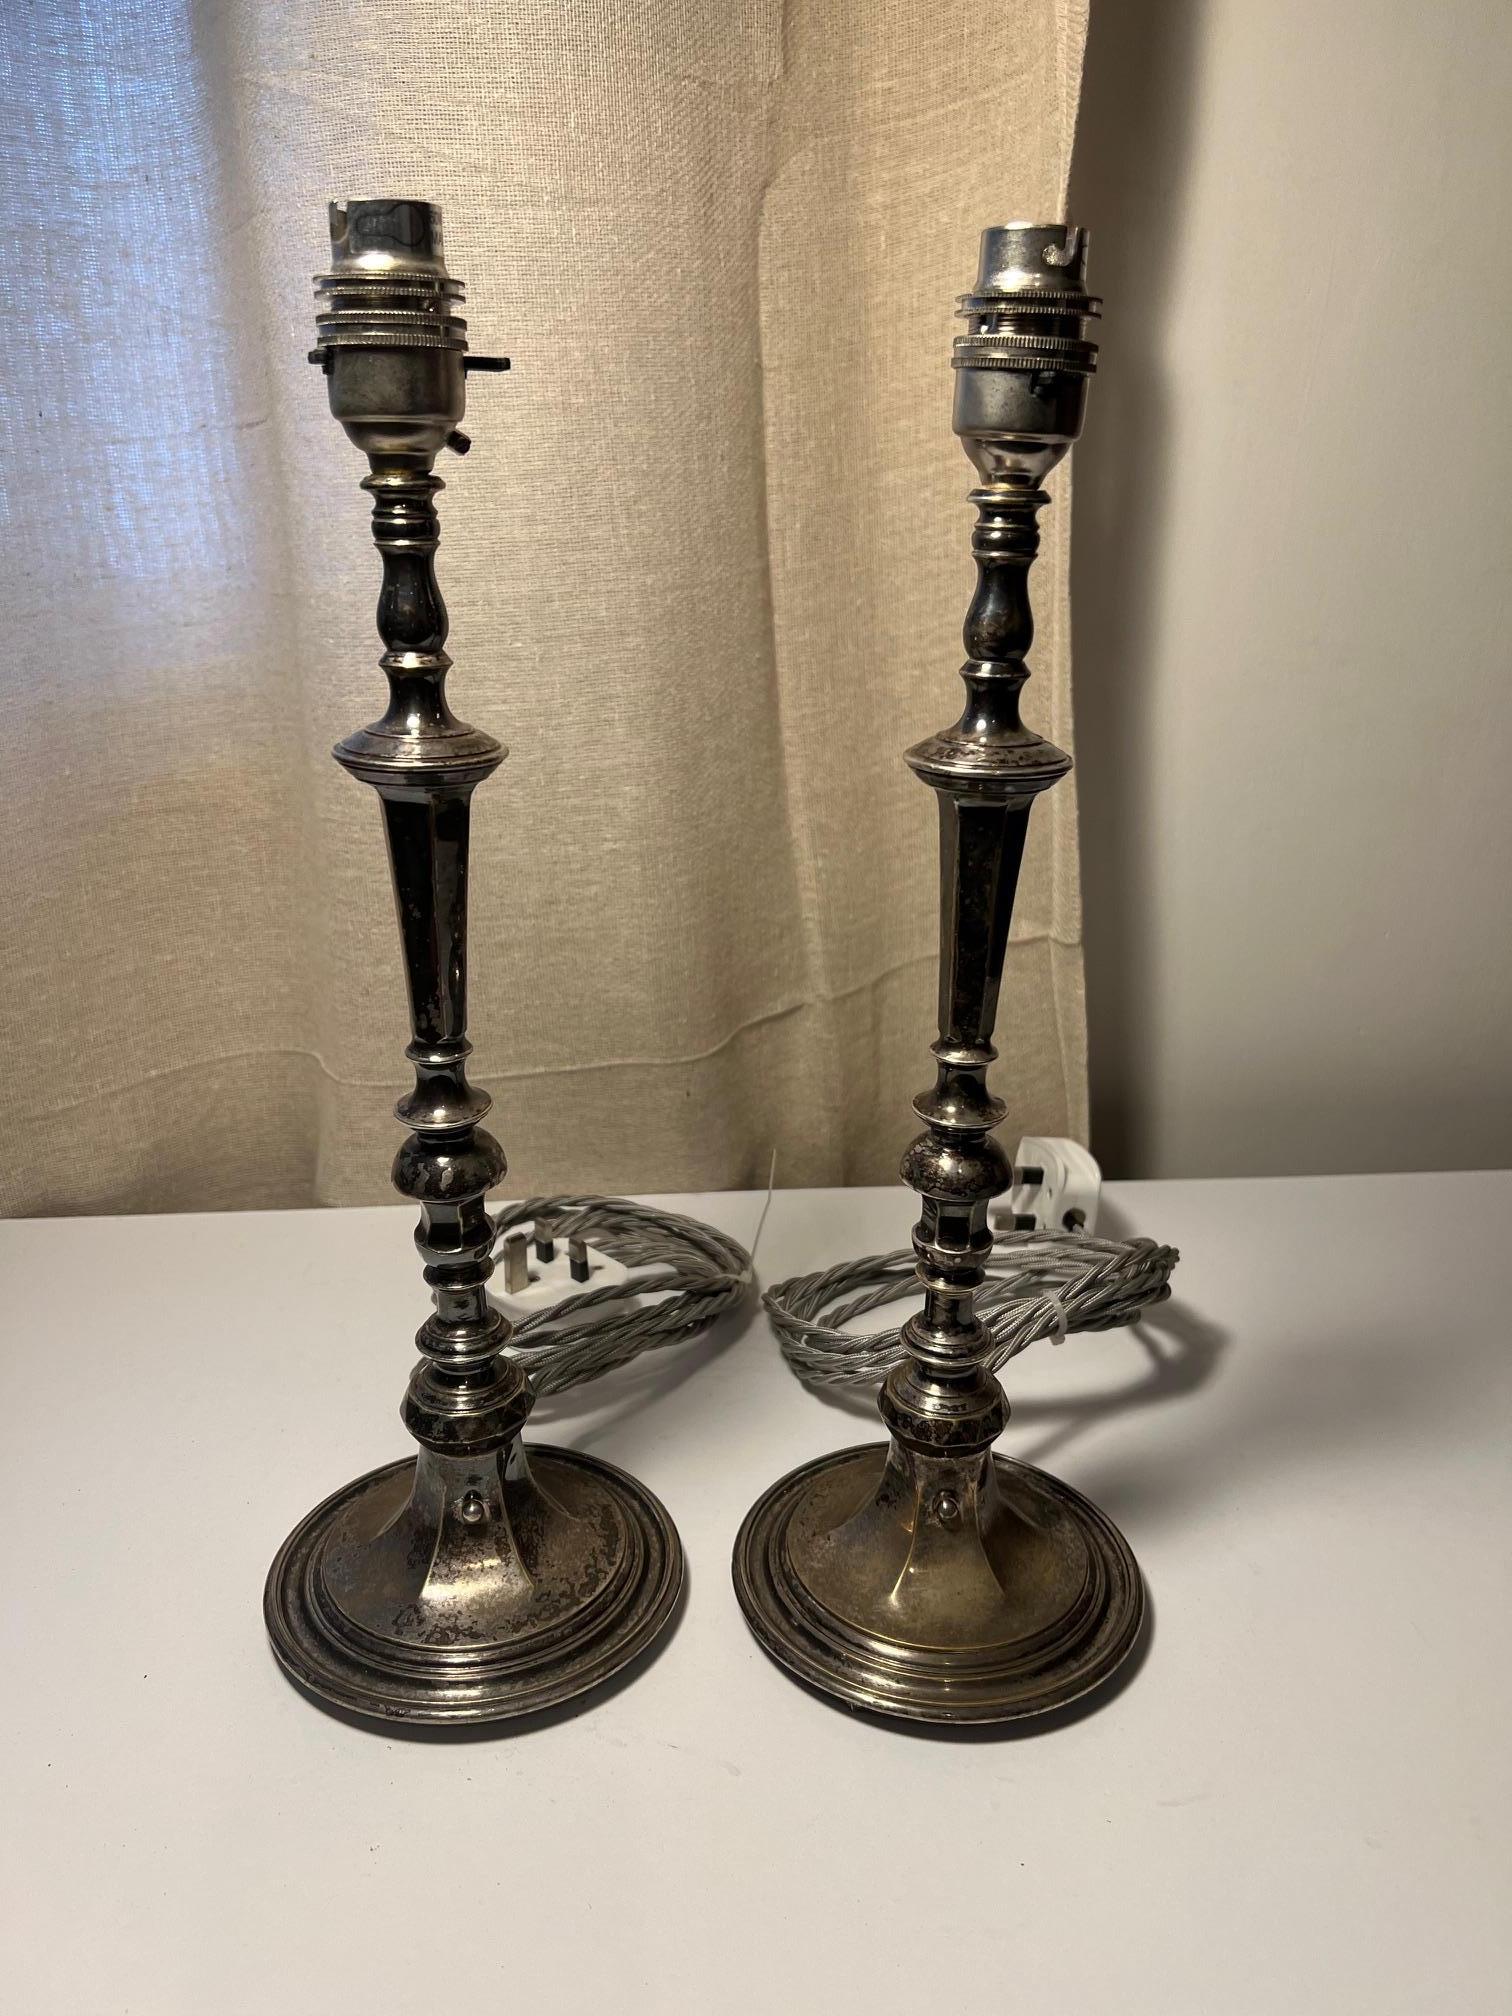 Exceptional quality pair of Edwardian, made directly for electricity lamps.

Probably, because of their quality they were made by Faraday & Sons in the west end of London.

The faded patination on these lamps blends very well with any